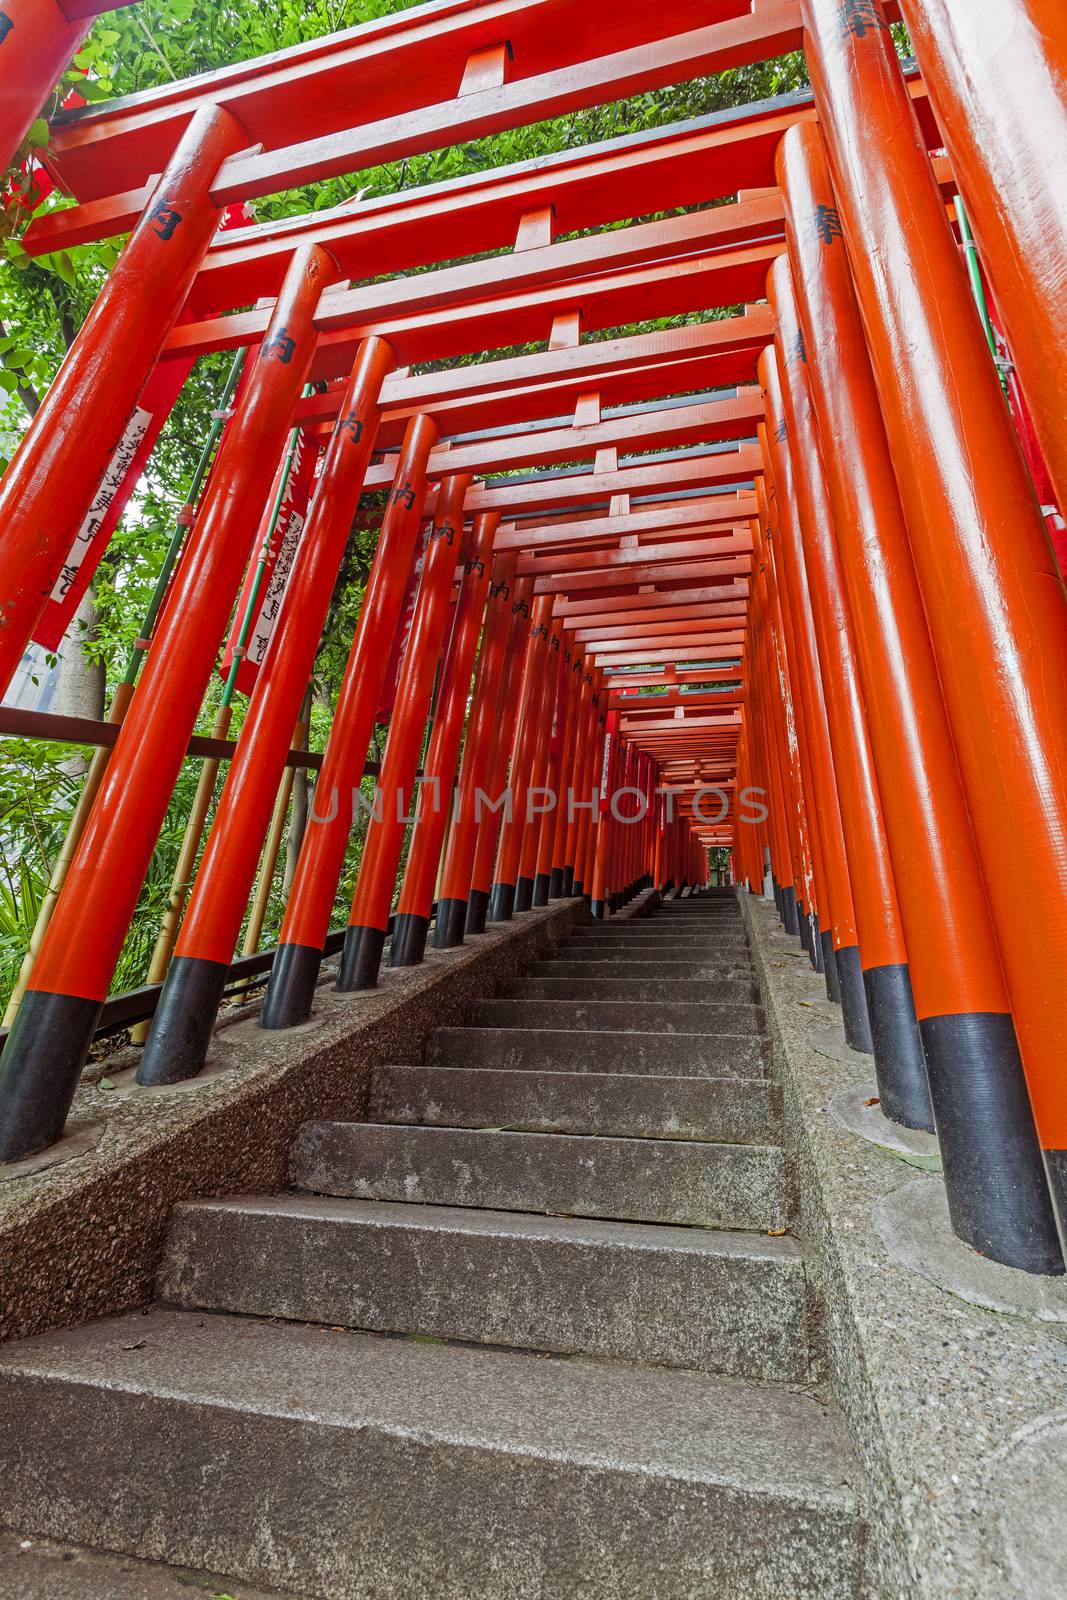 The stairs lead up under Japanese traditional red Tori gates in Tokyo